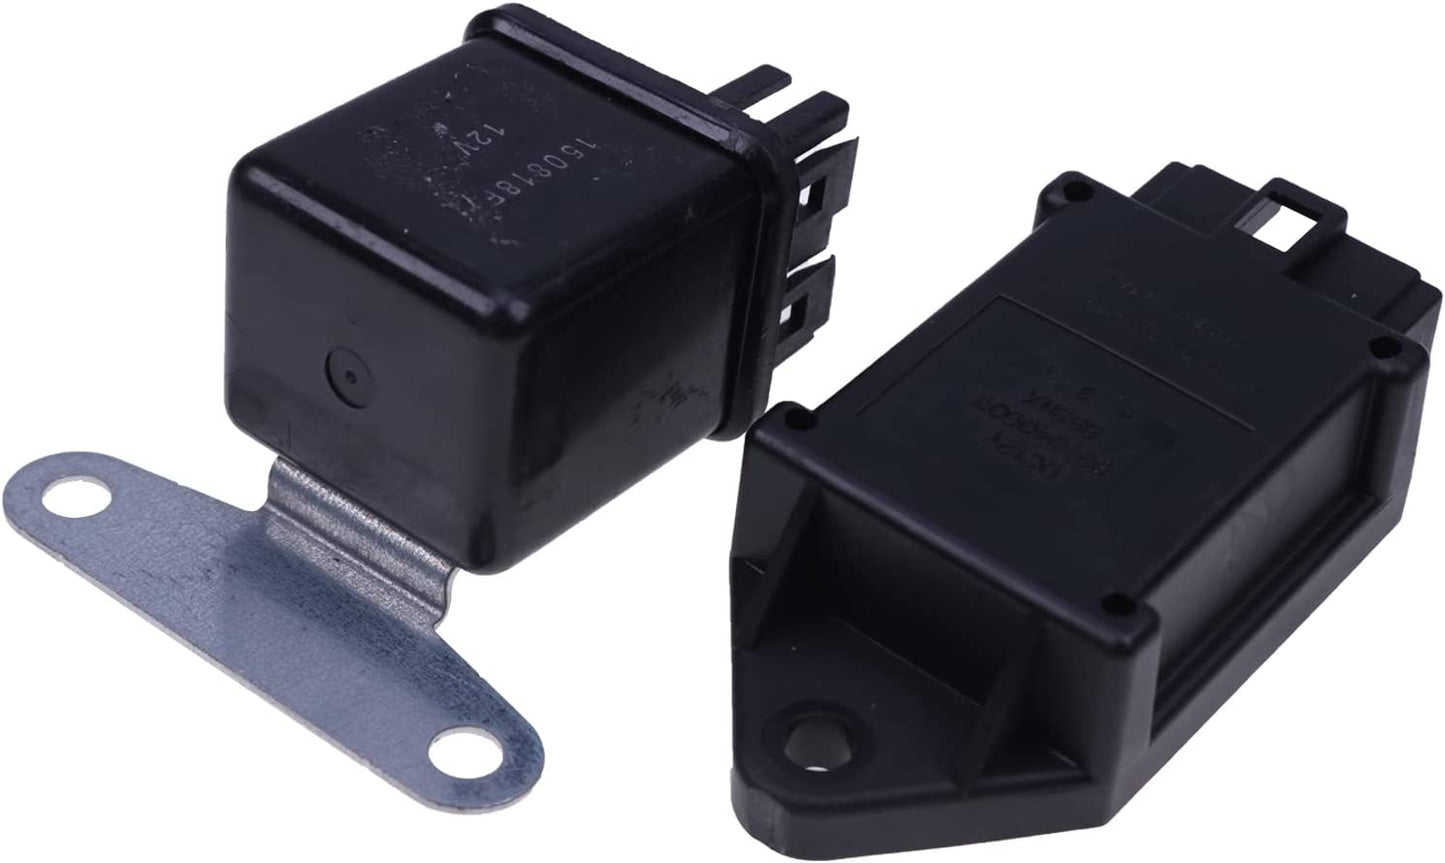 New Glow Plug Relay & Controller Kit 16415-65600 16415-65660 16415-65662 Compatible with Kubota D902 D905